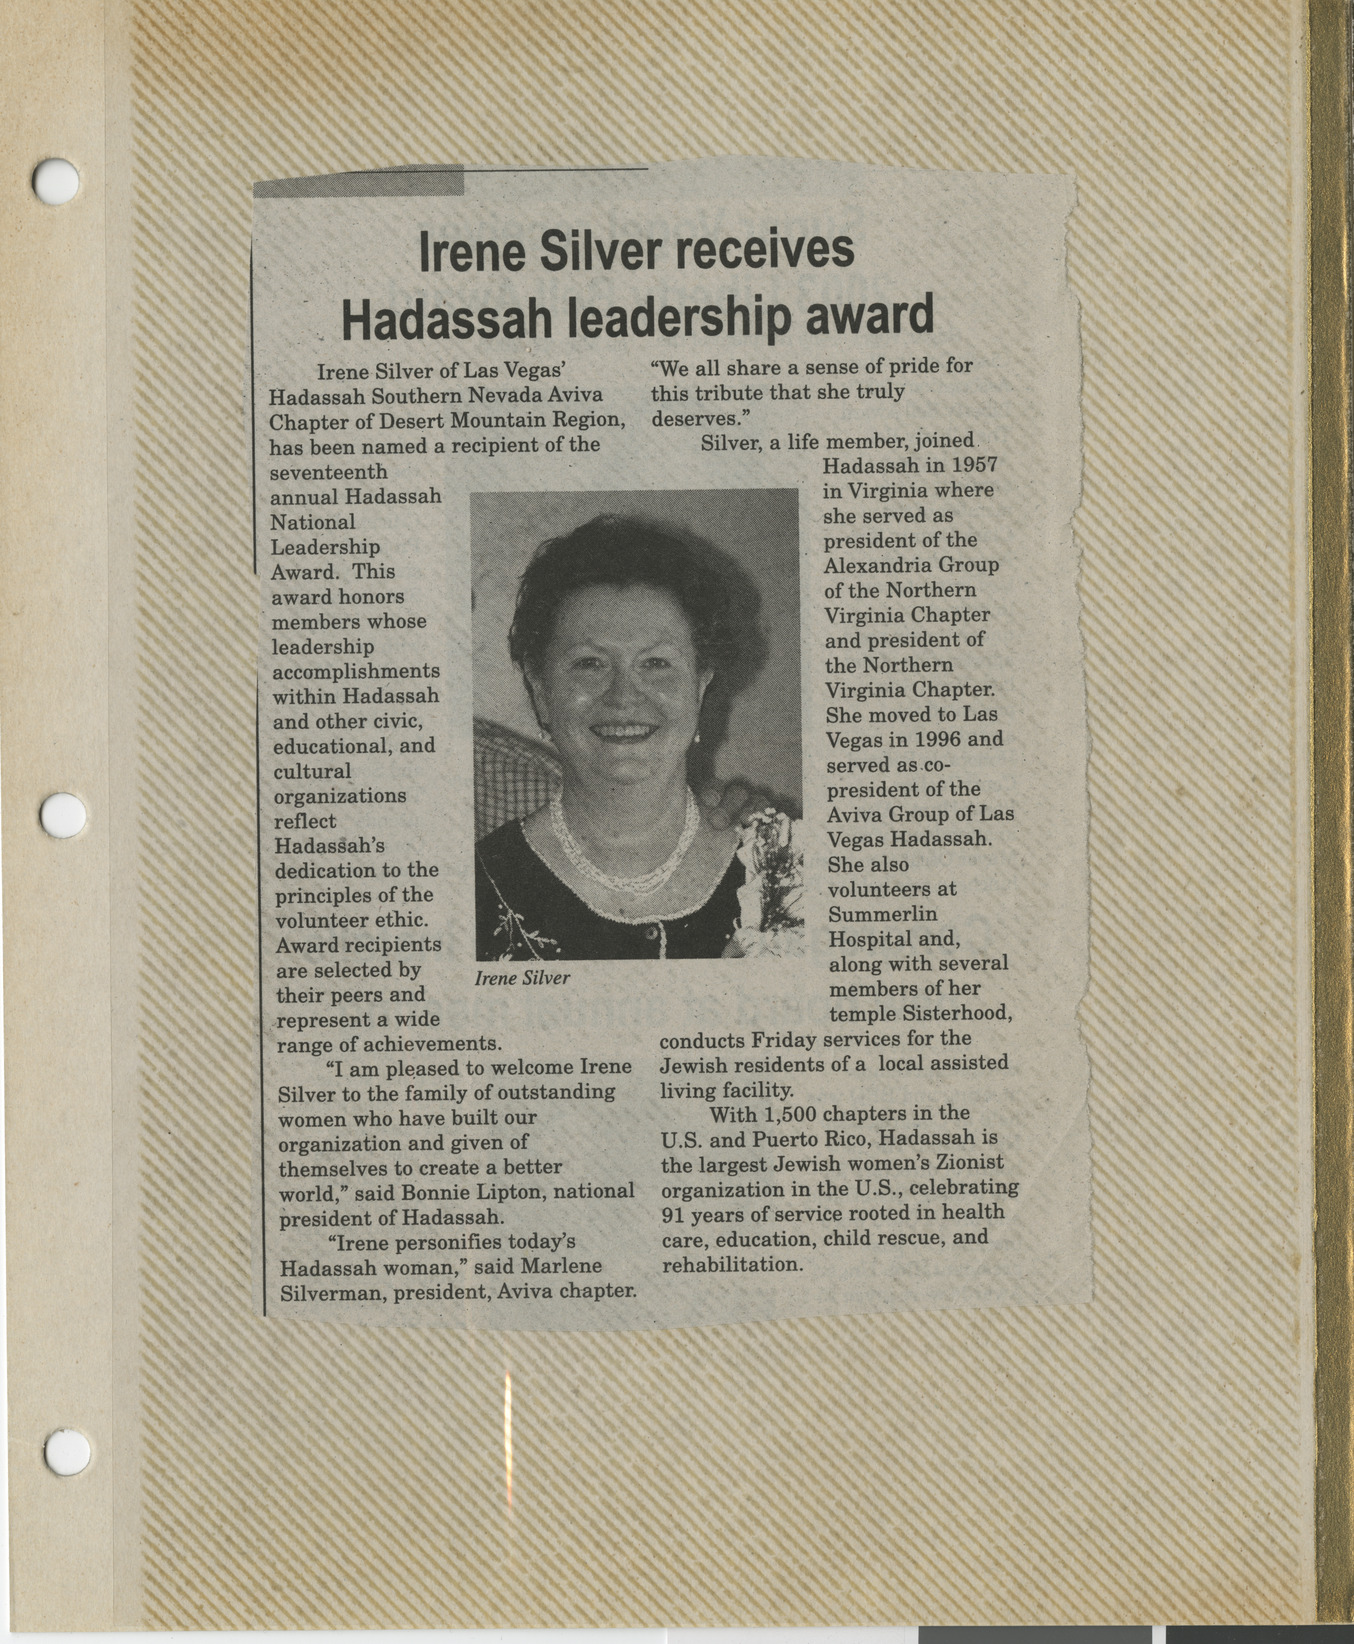 Newspaper clipping, Irene Silver receives Hadassah leadership award, publication and date unknown